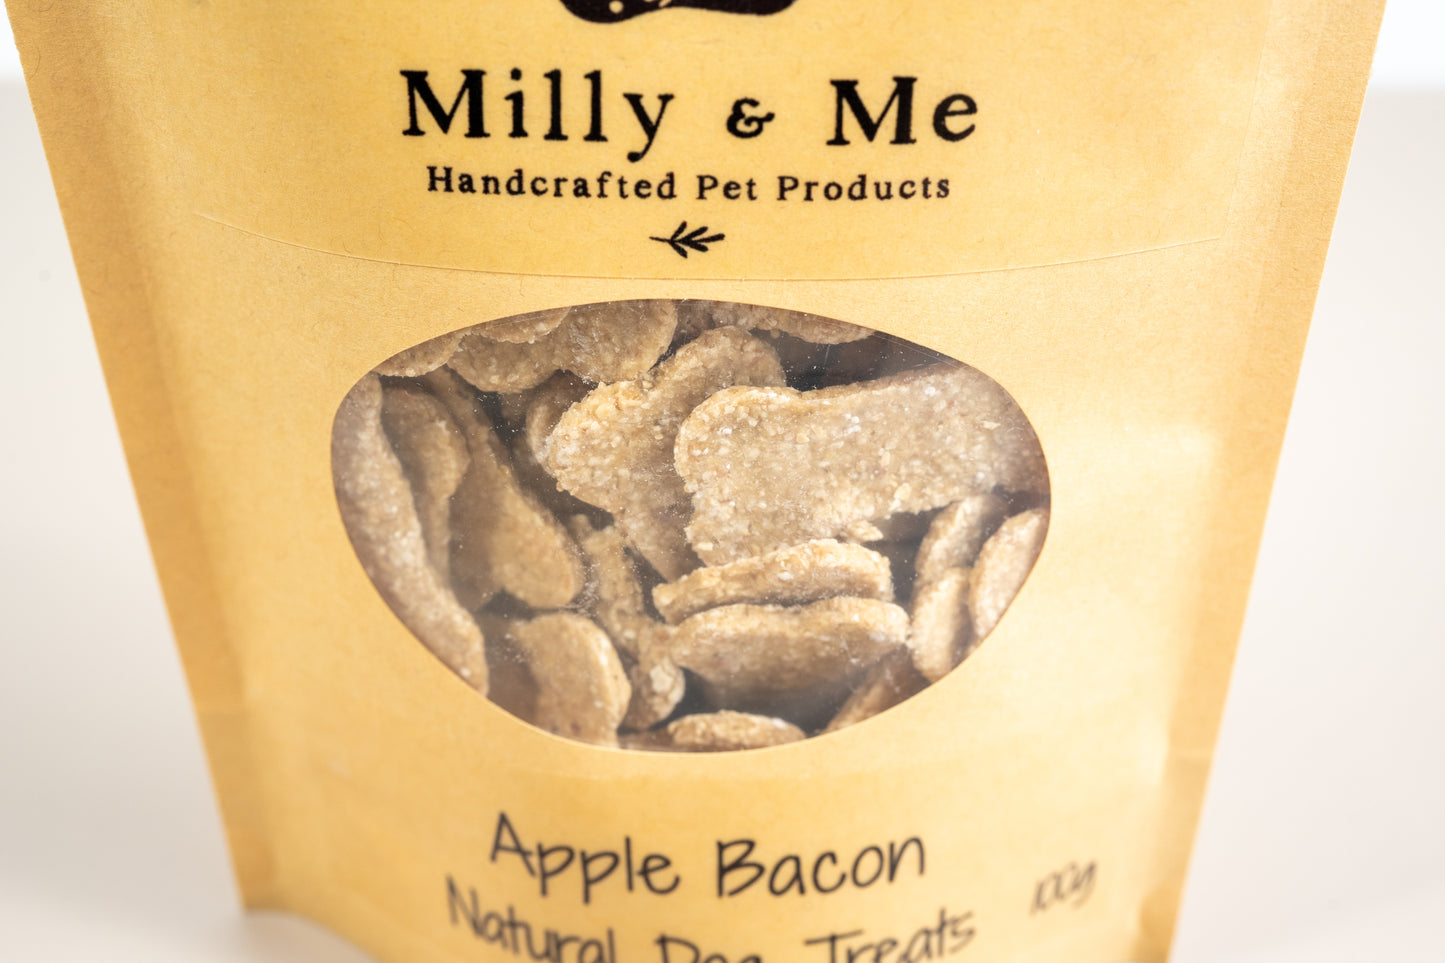 Close-up view of the apple bacon dog treats.